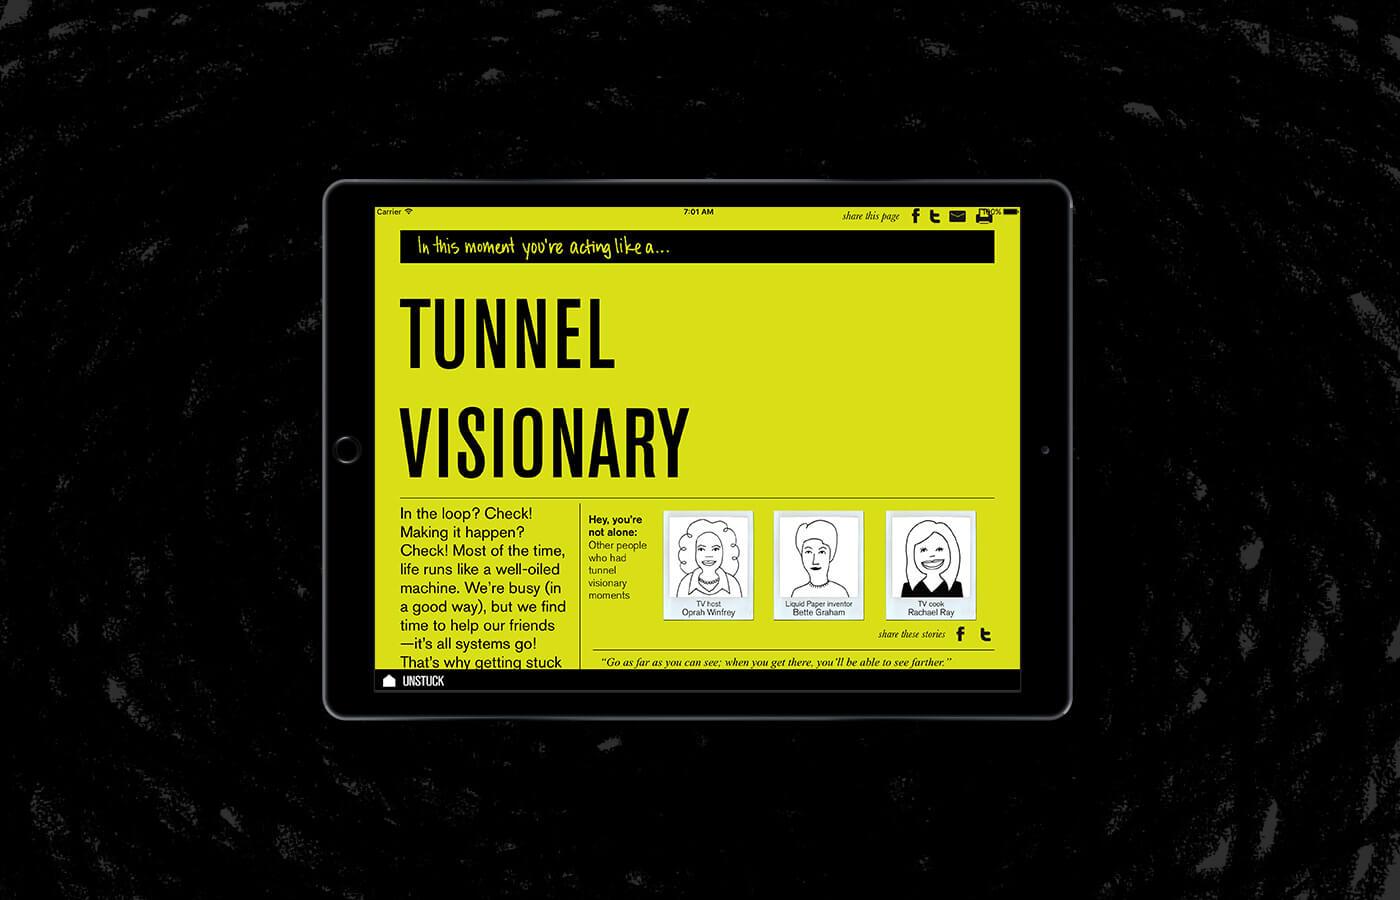 Tunnel visionary